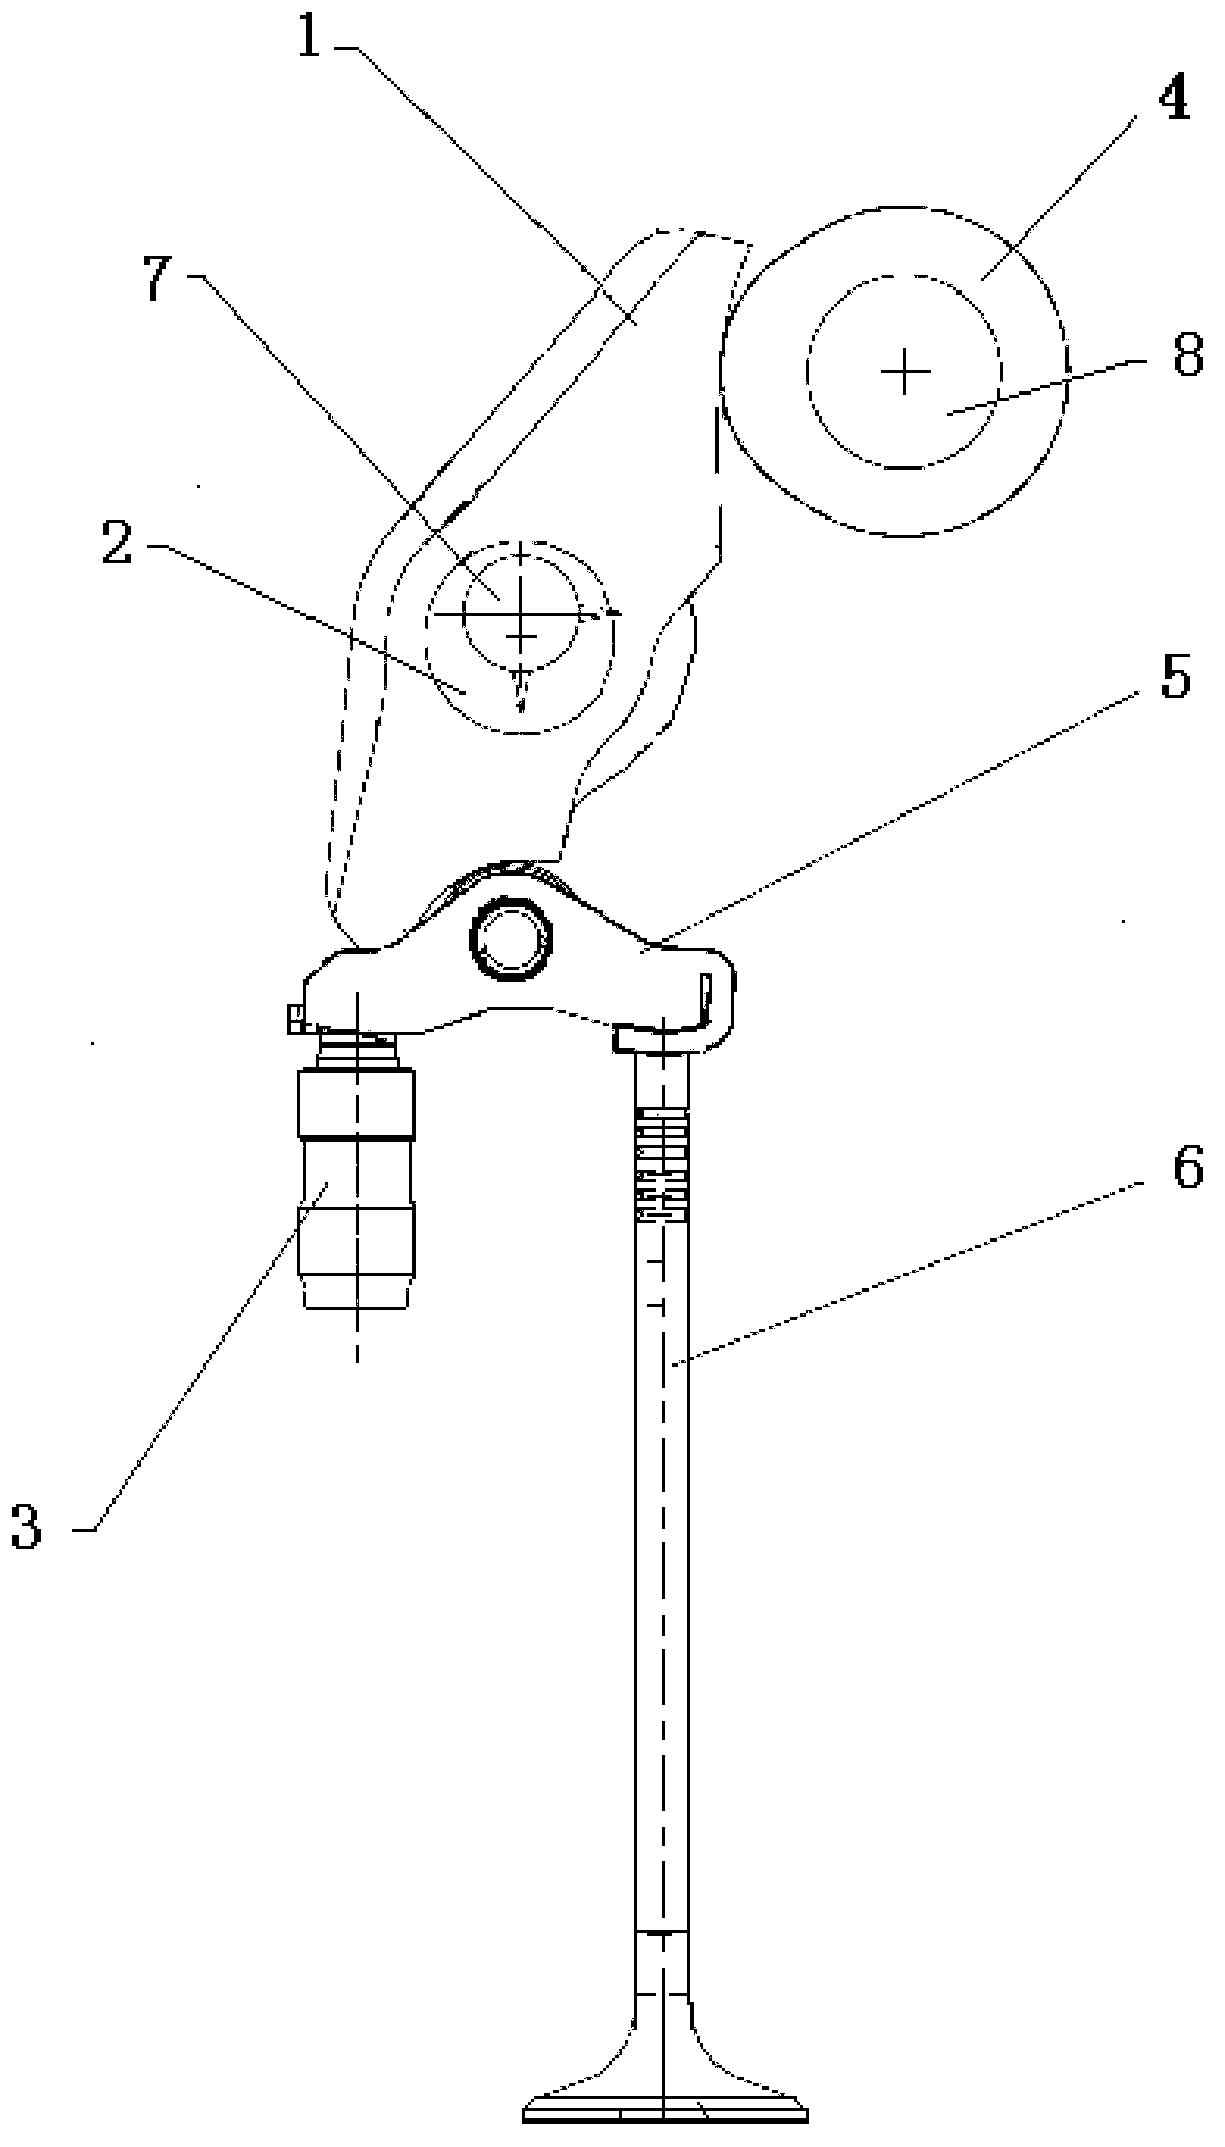 Continuously variable valve lift system